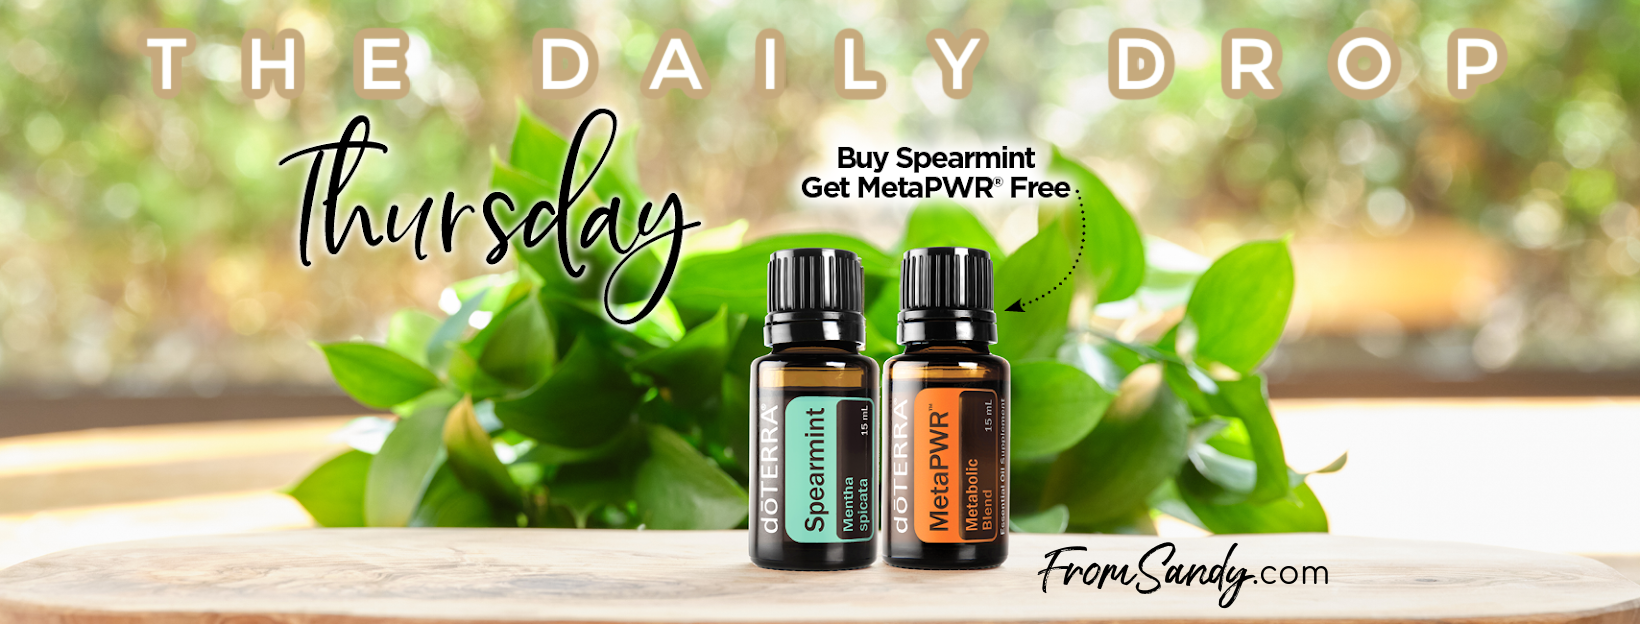 DIGEST: Buy Spearmint, Get MetaPWR Free (3/23/23 ONLY) | From Sandy